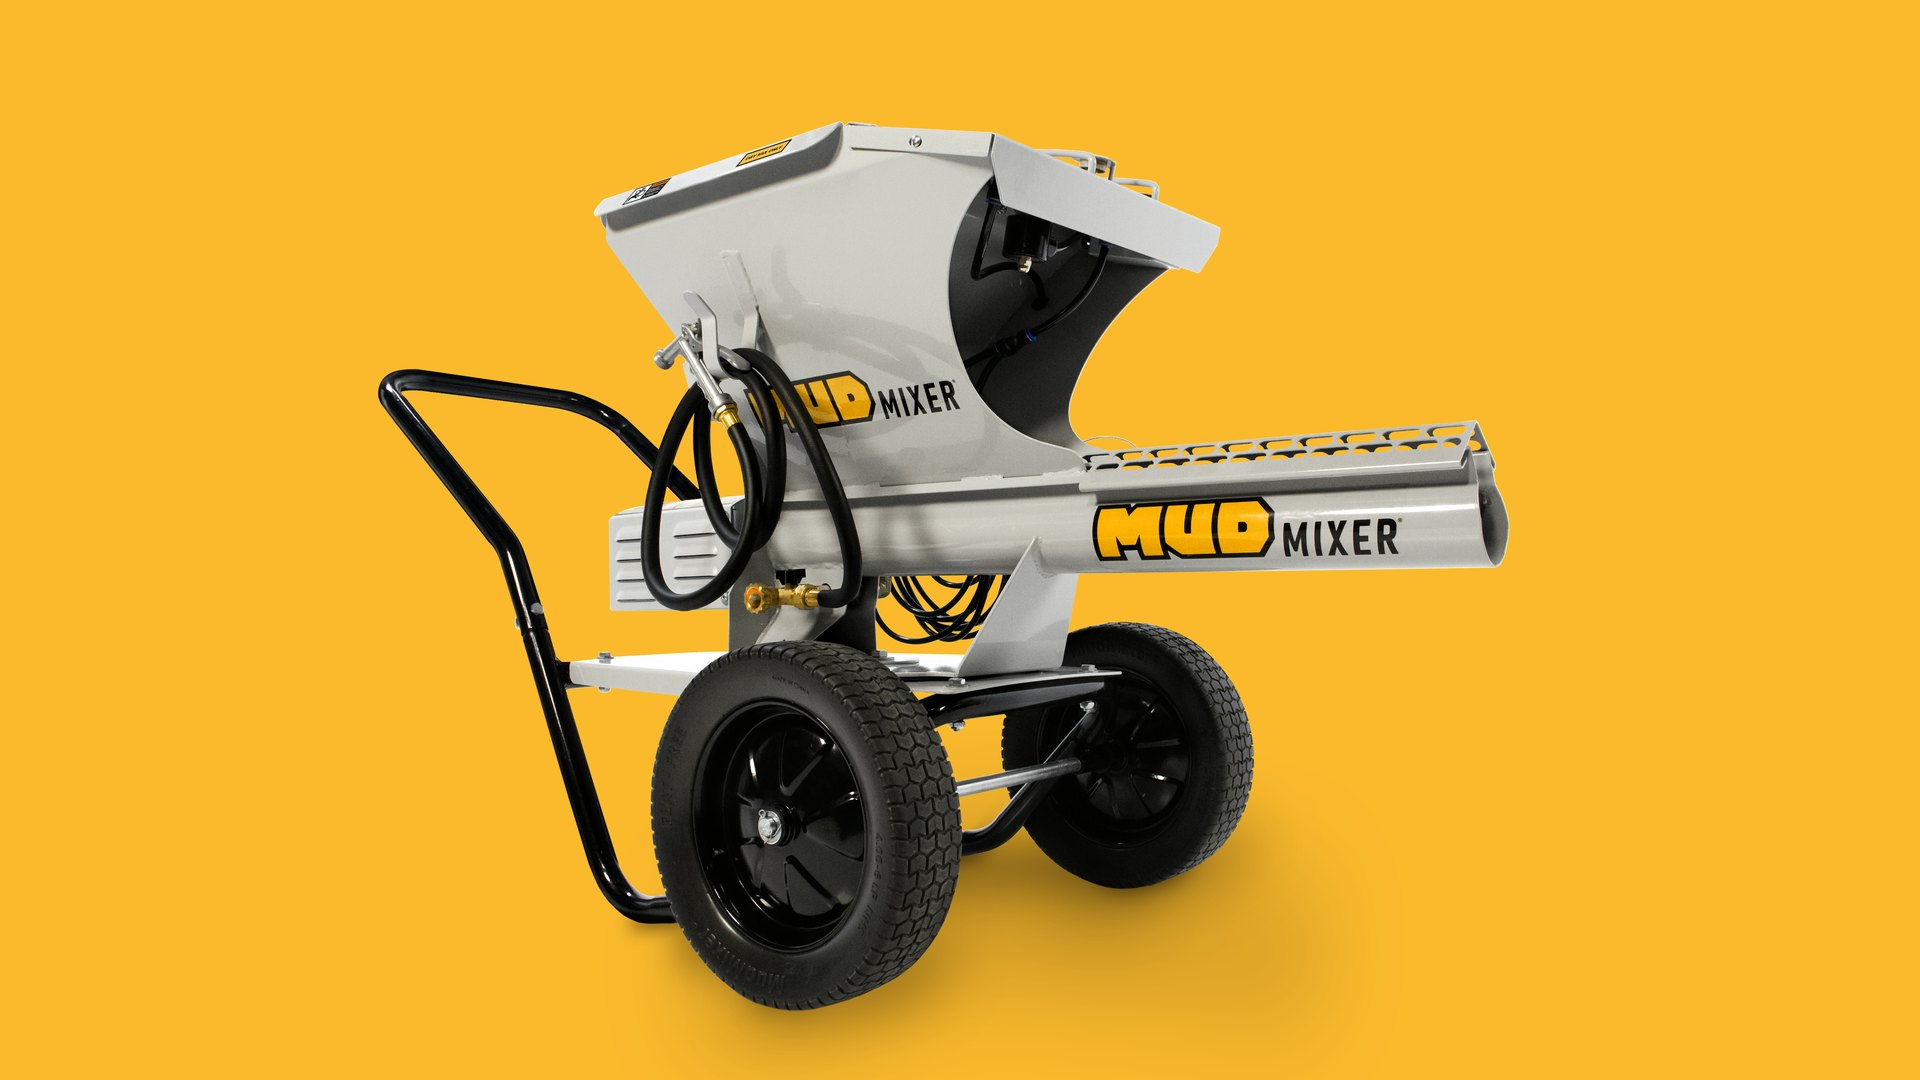 MudMixer  For Construction Pros